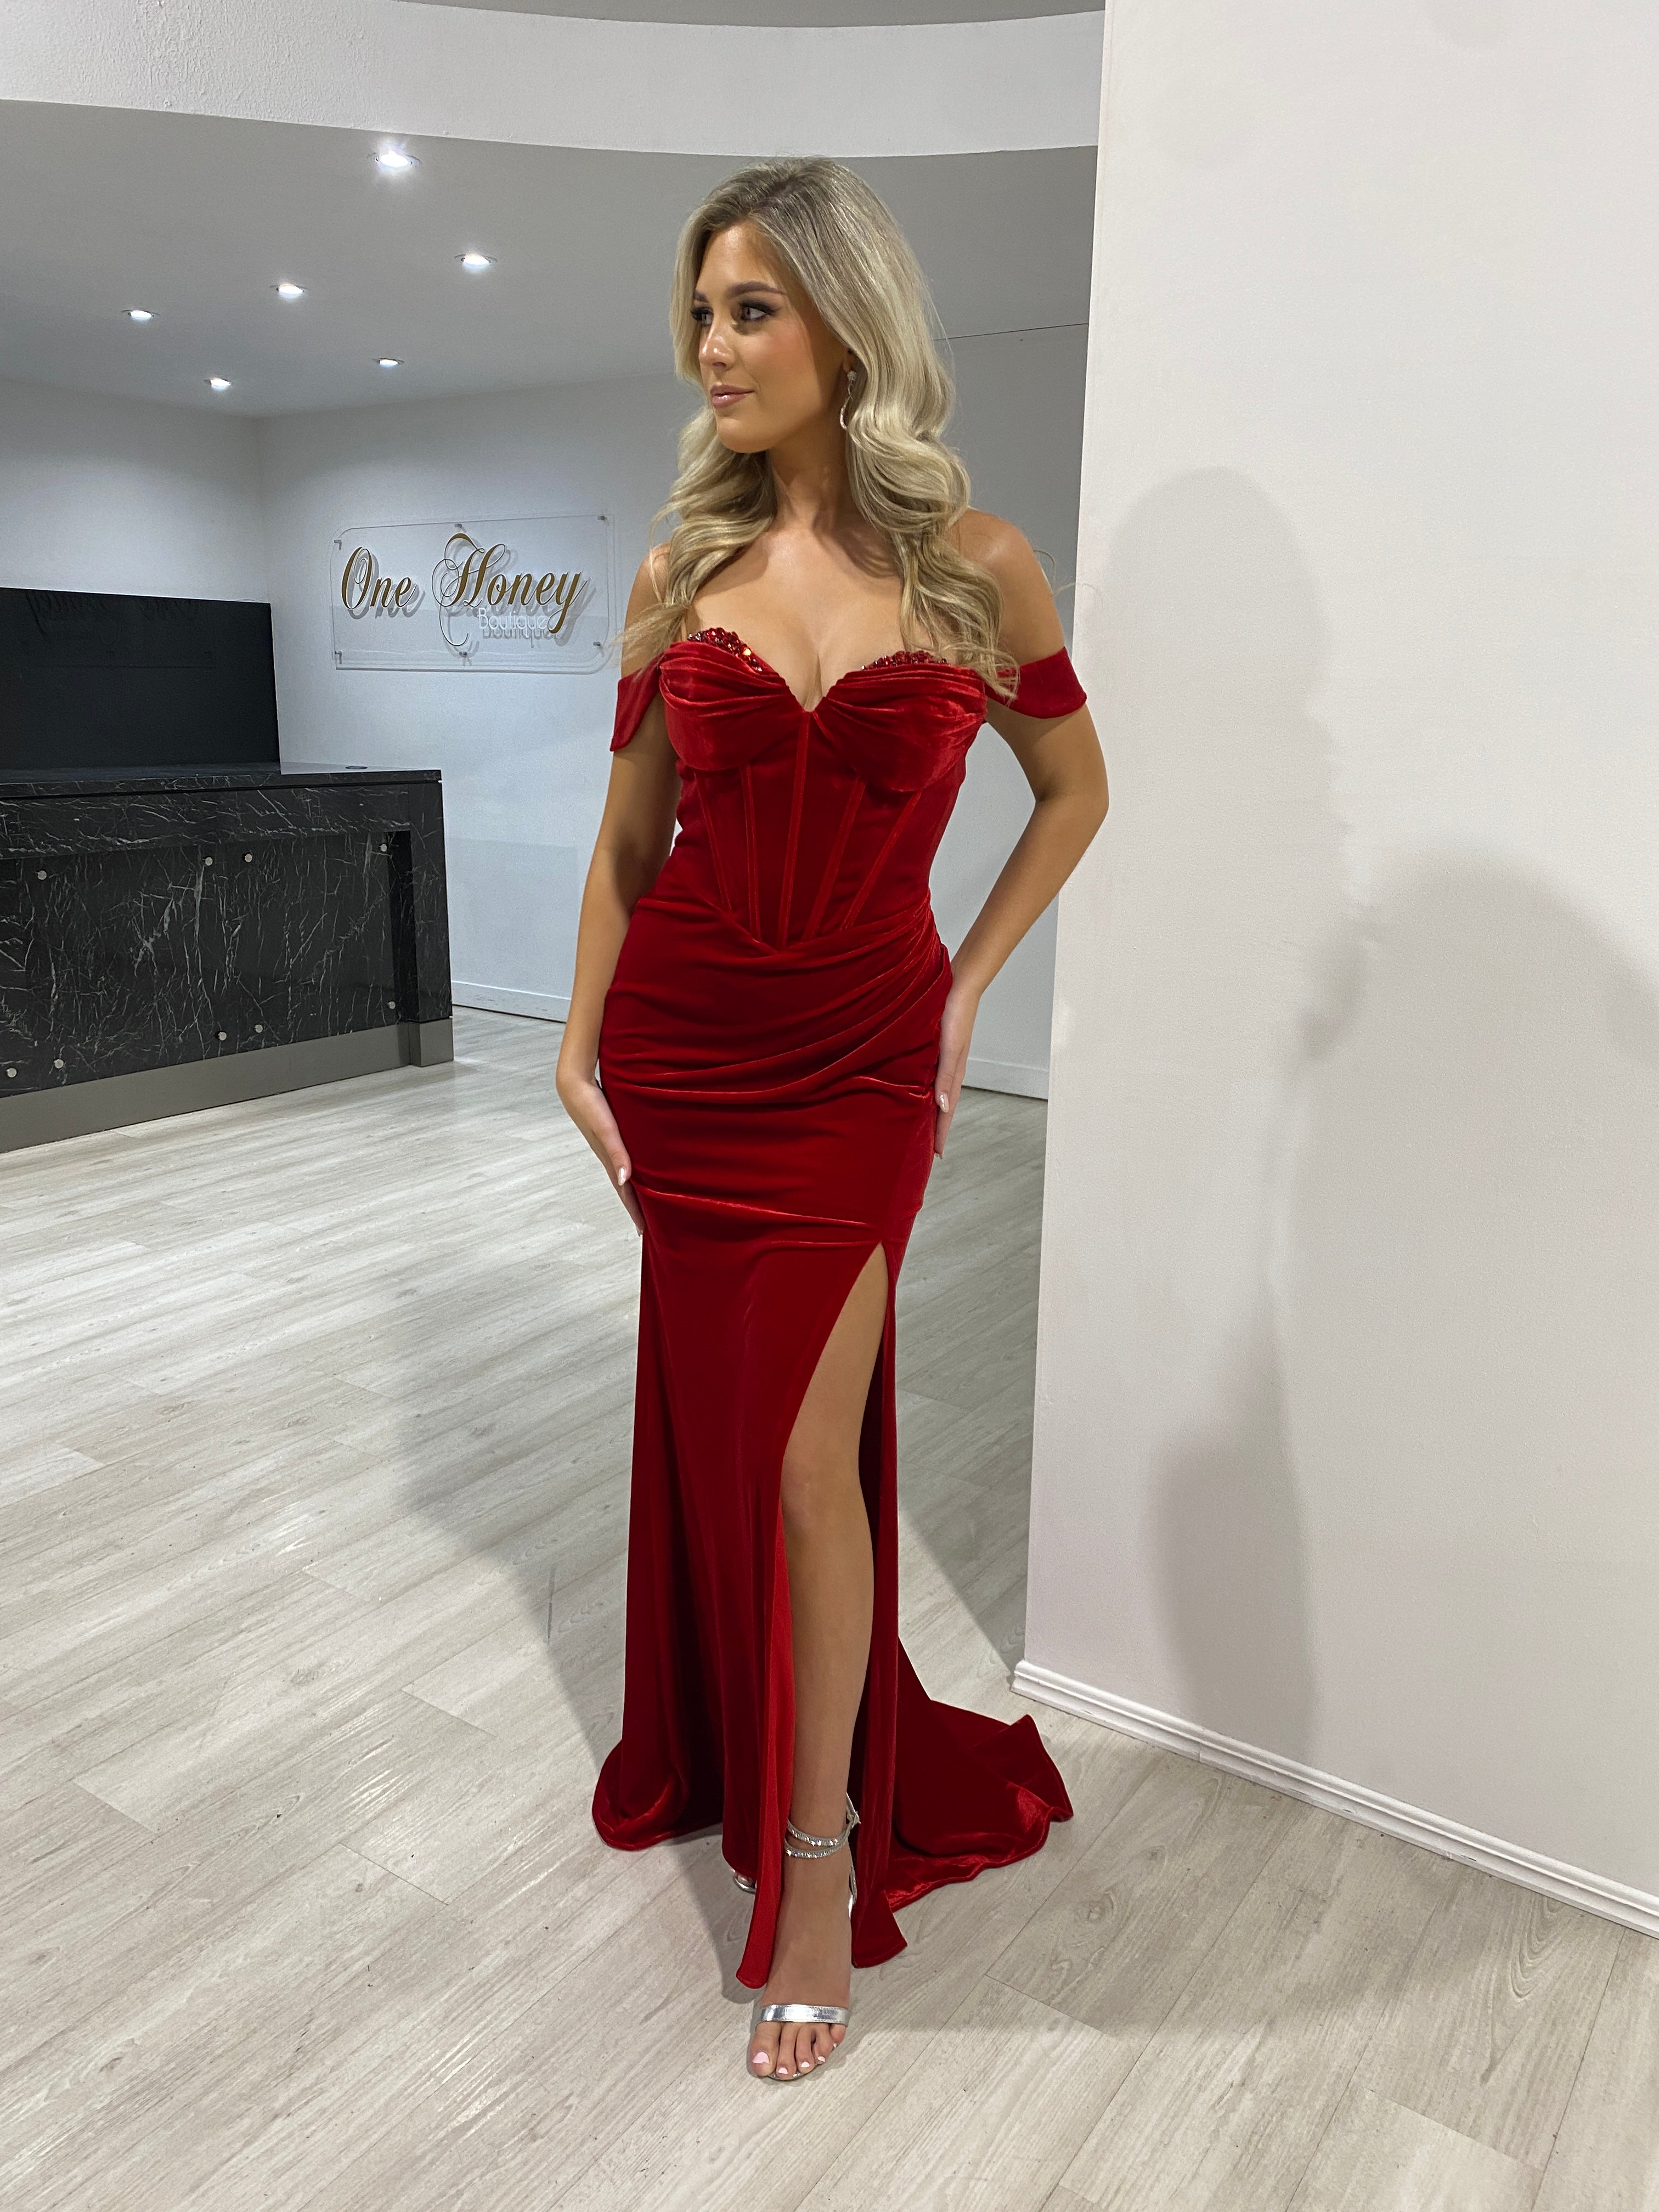 Honey Couture RHIANNA Red Off the Shoulder Beaded Bust Velour Mermaid Formal Dress